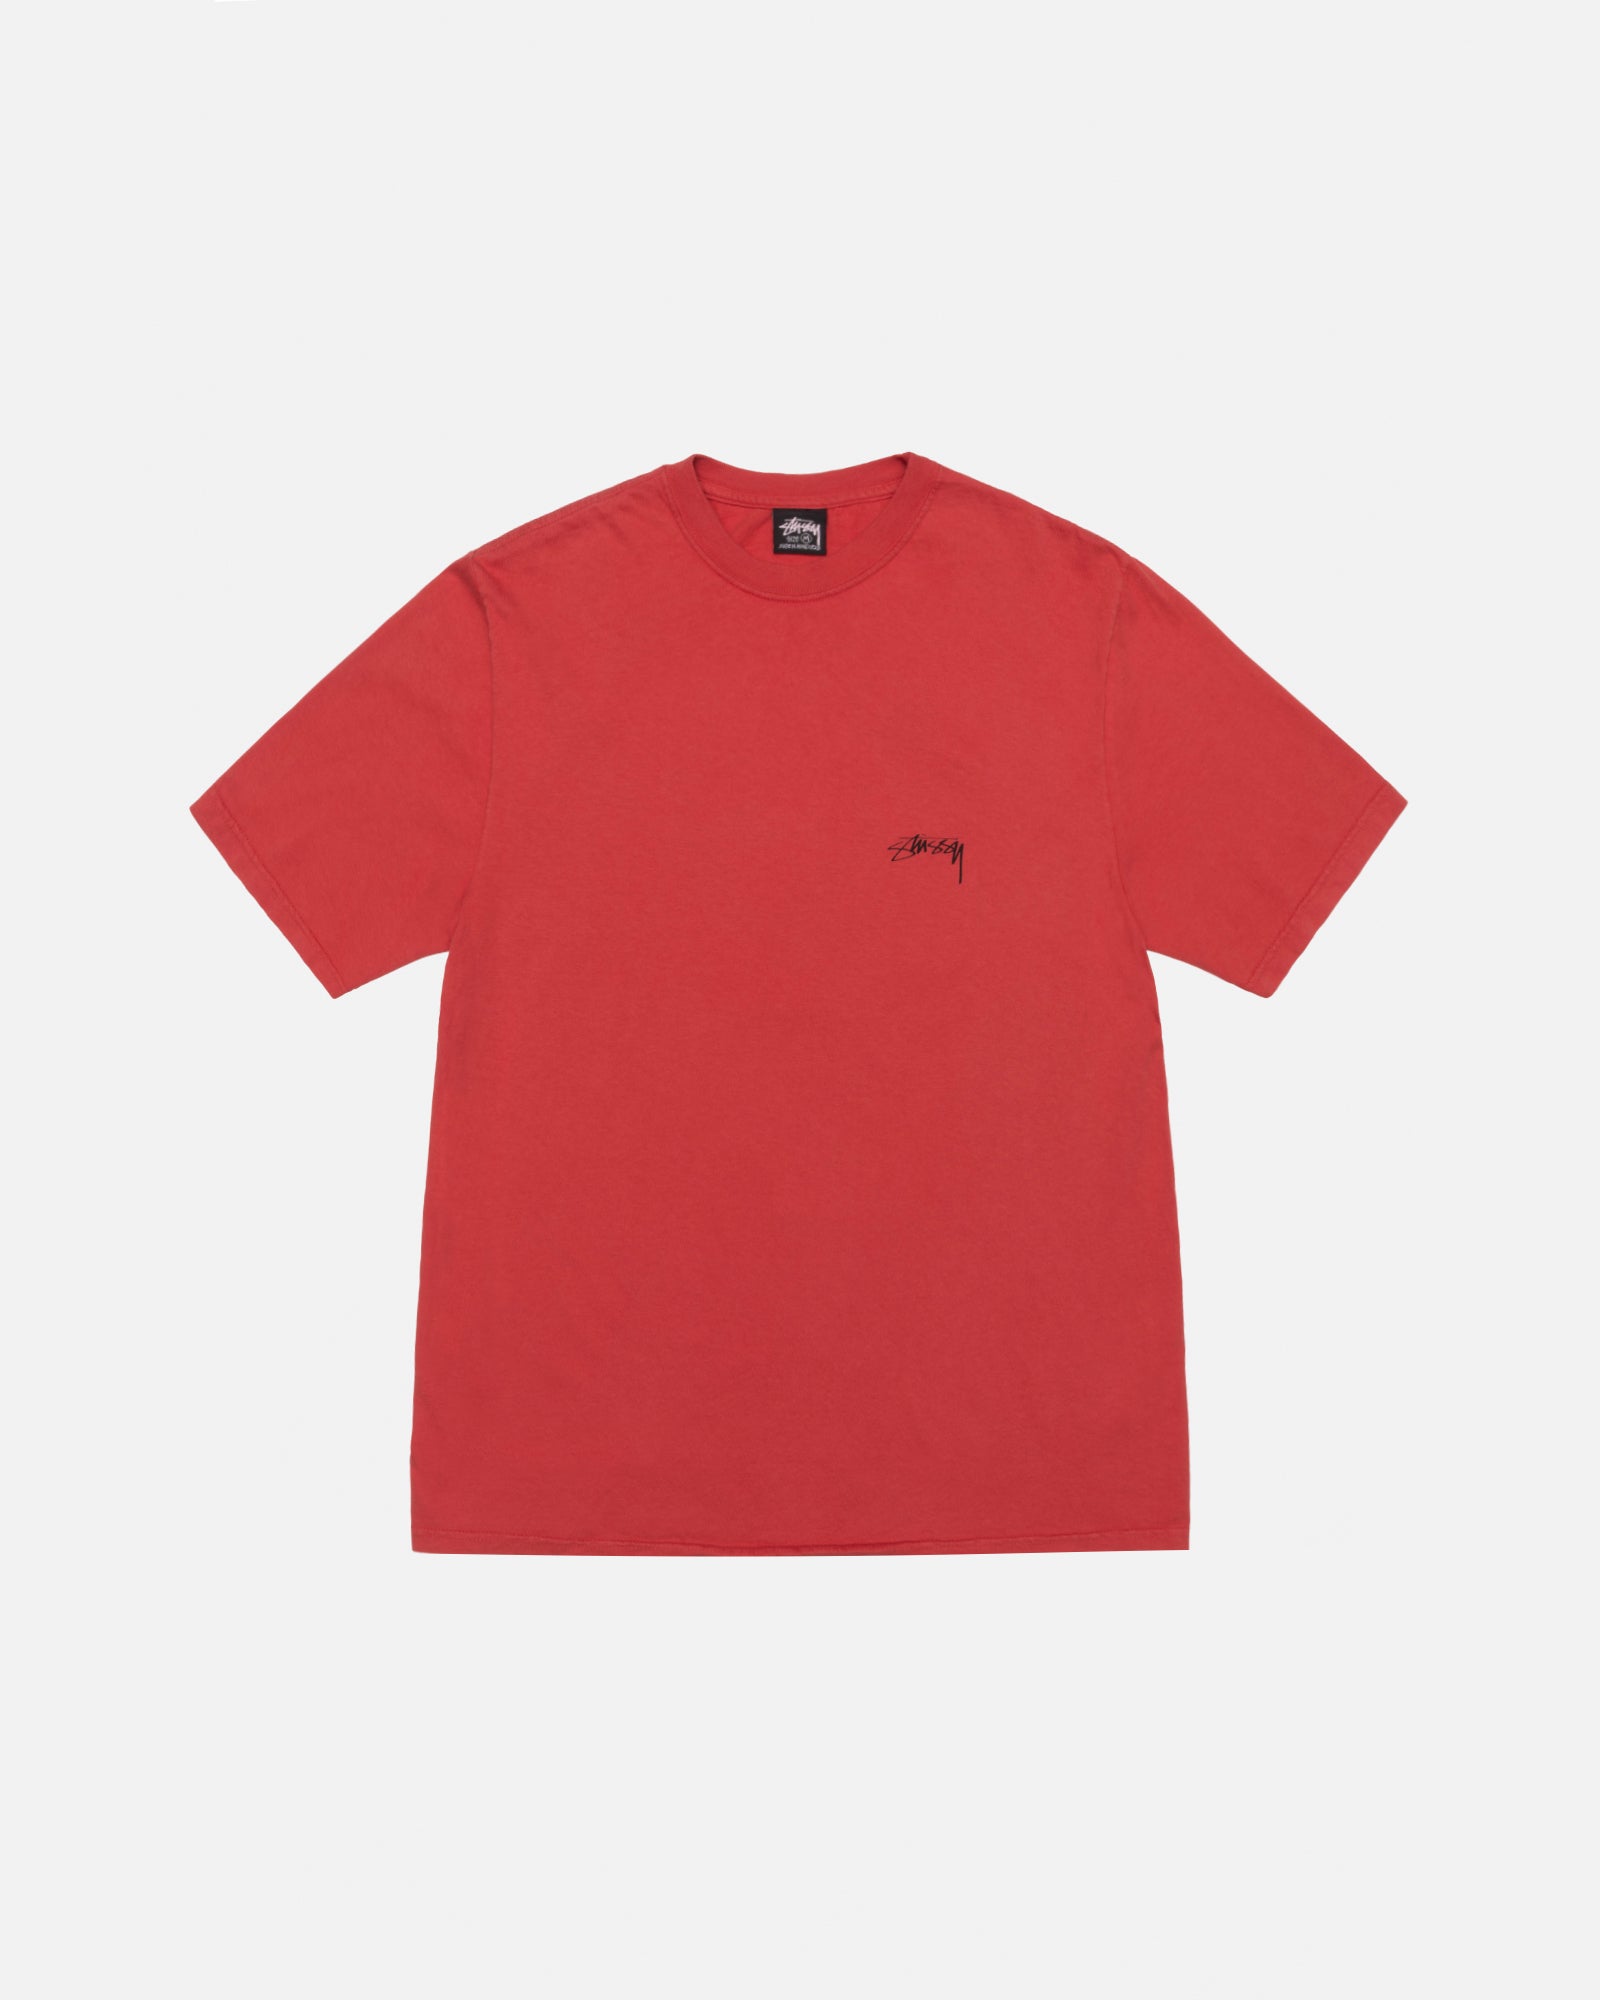 Stüssy Smooth Stock Tee Pigment Dyed Guava Shortsleeve